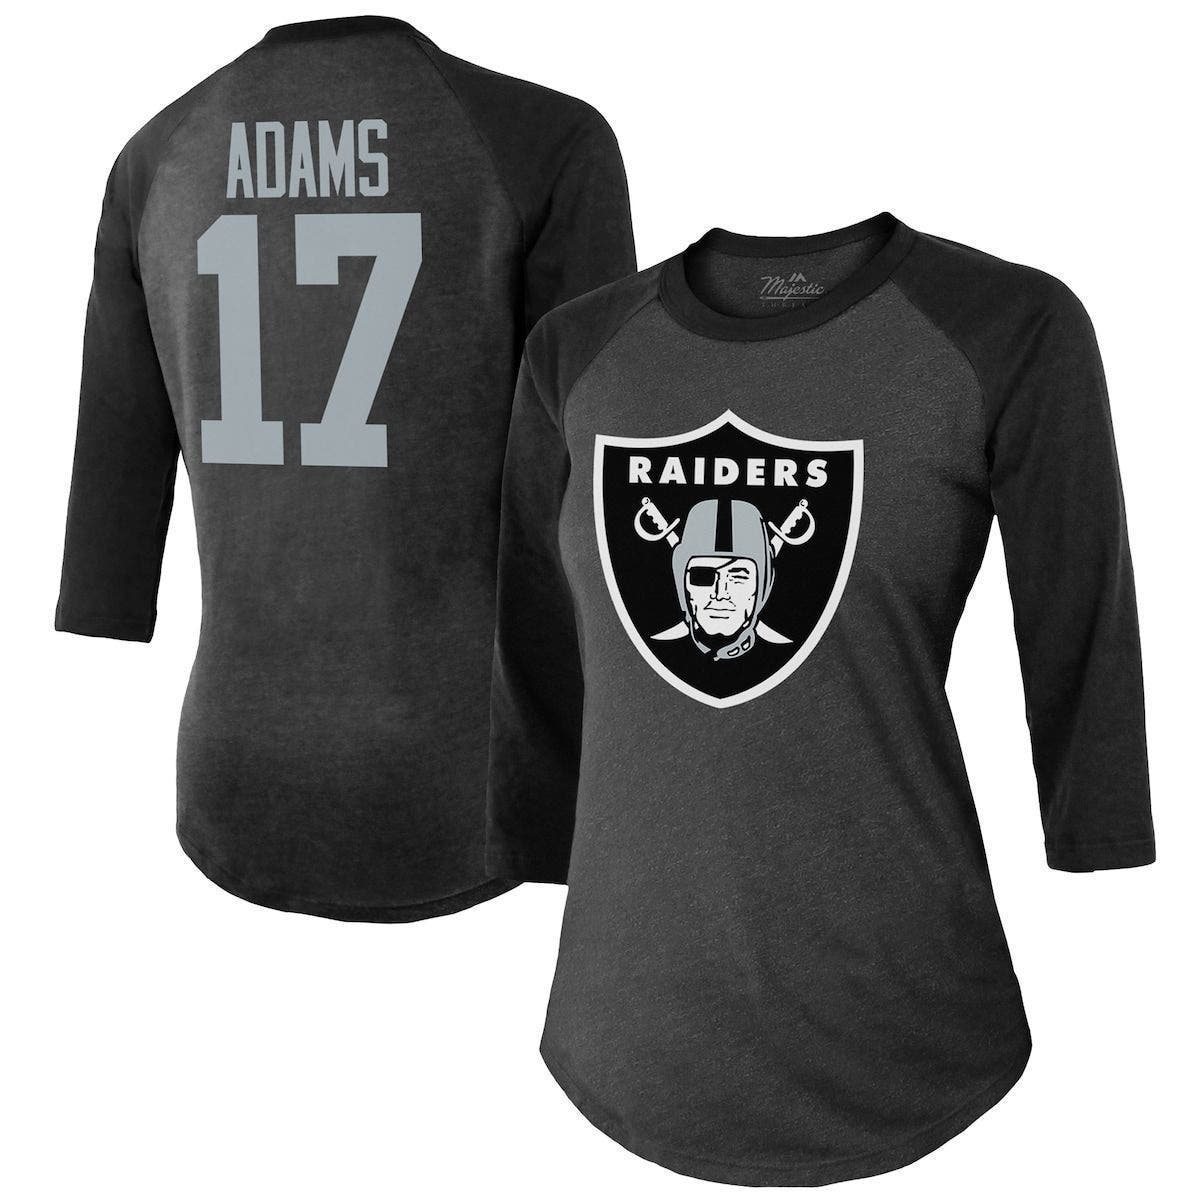 Raiders Custom Personalized Name & Number Woman's T-shirt 